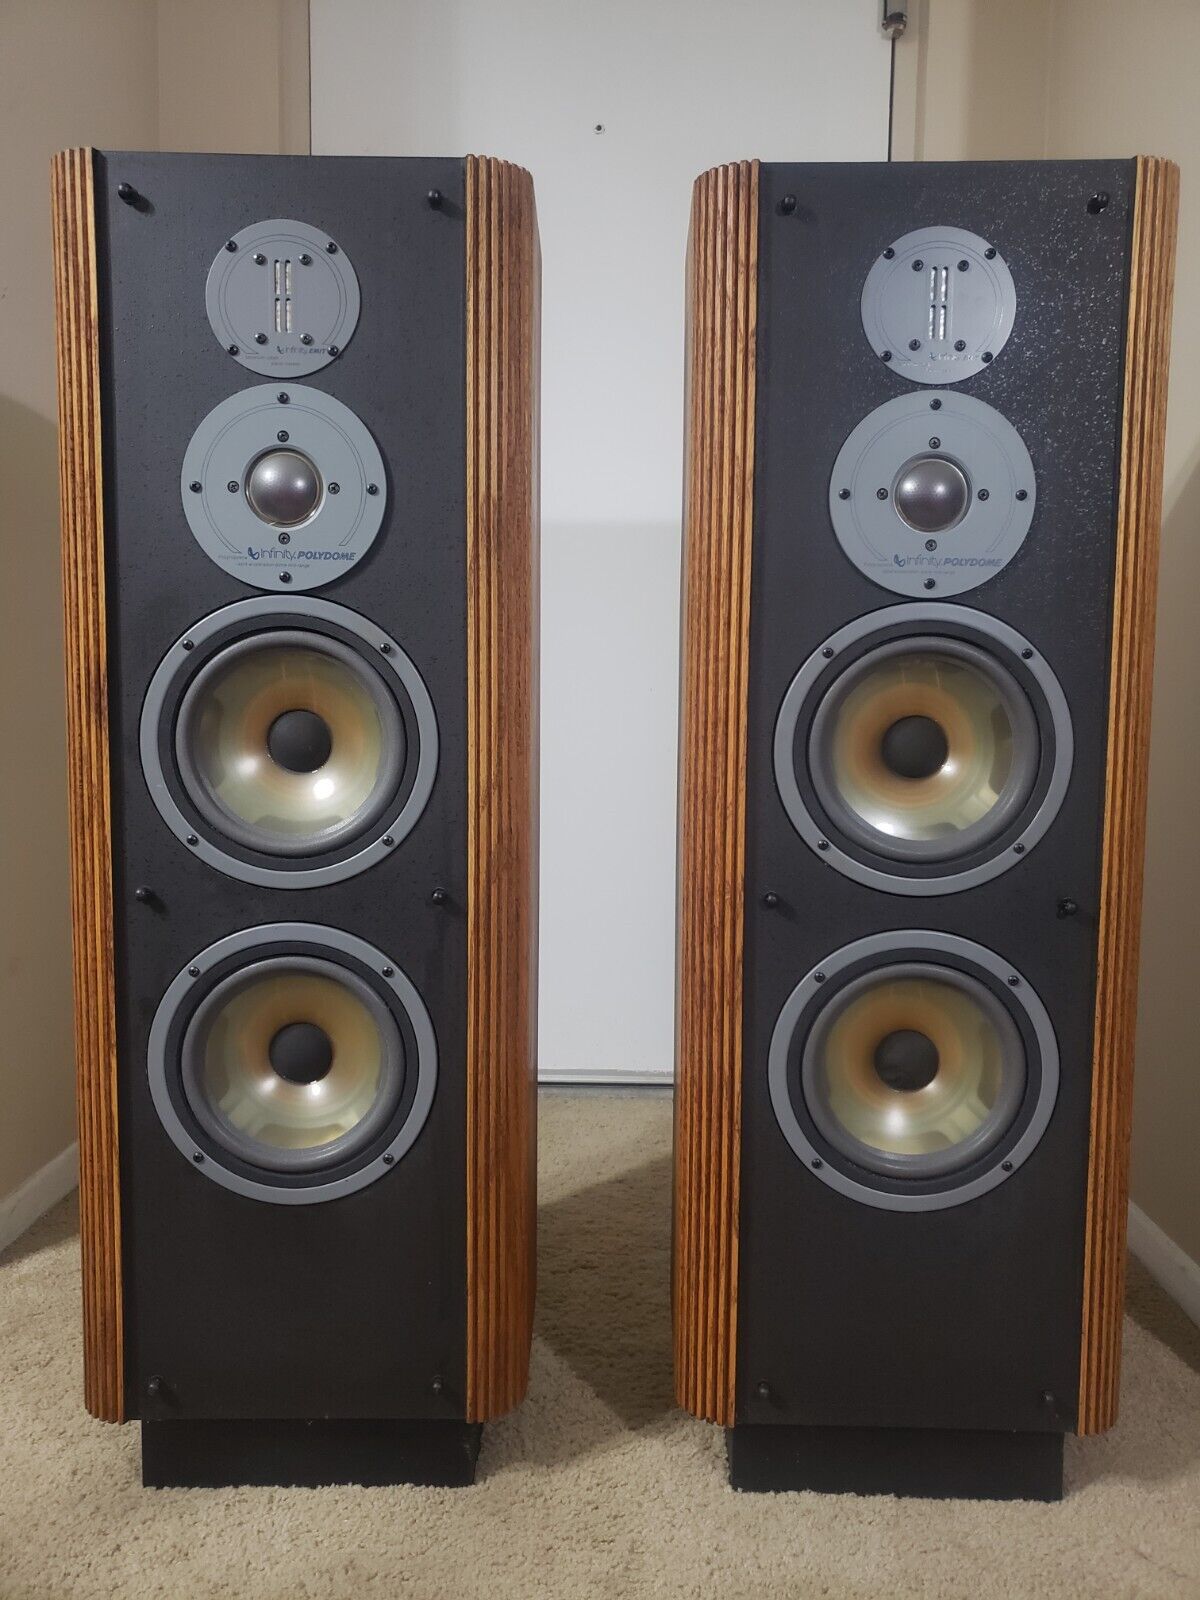 Infinity Reference Series RS4B 3-way Loudspeaker System - Near Mint Condition